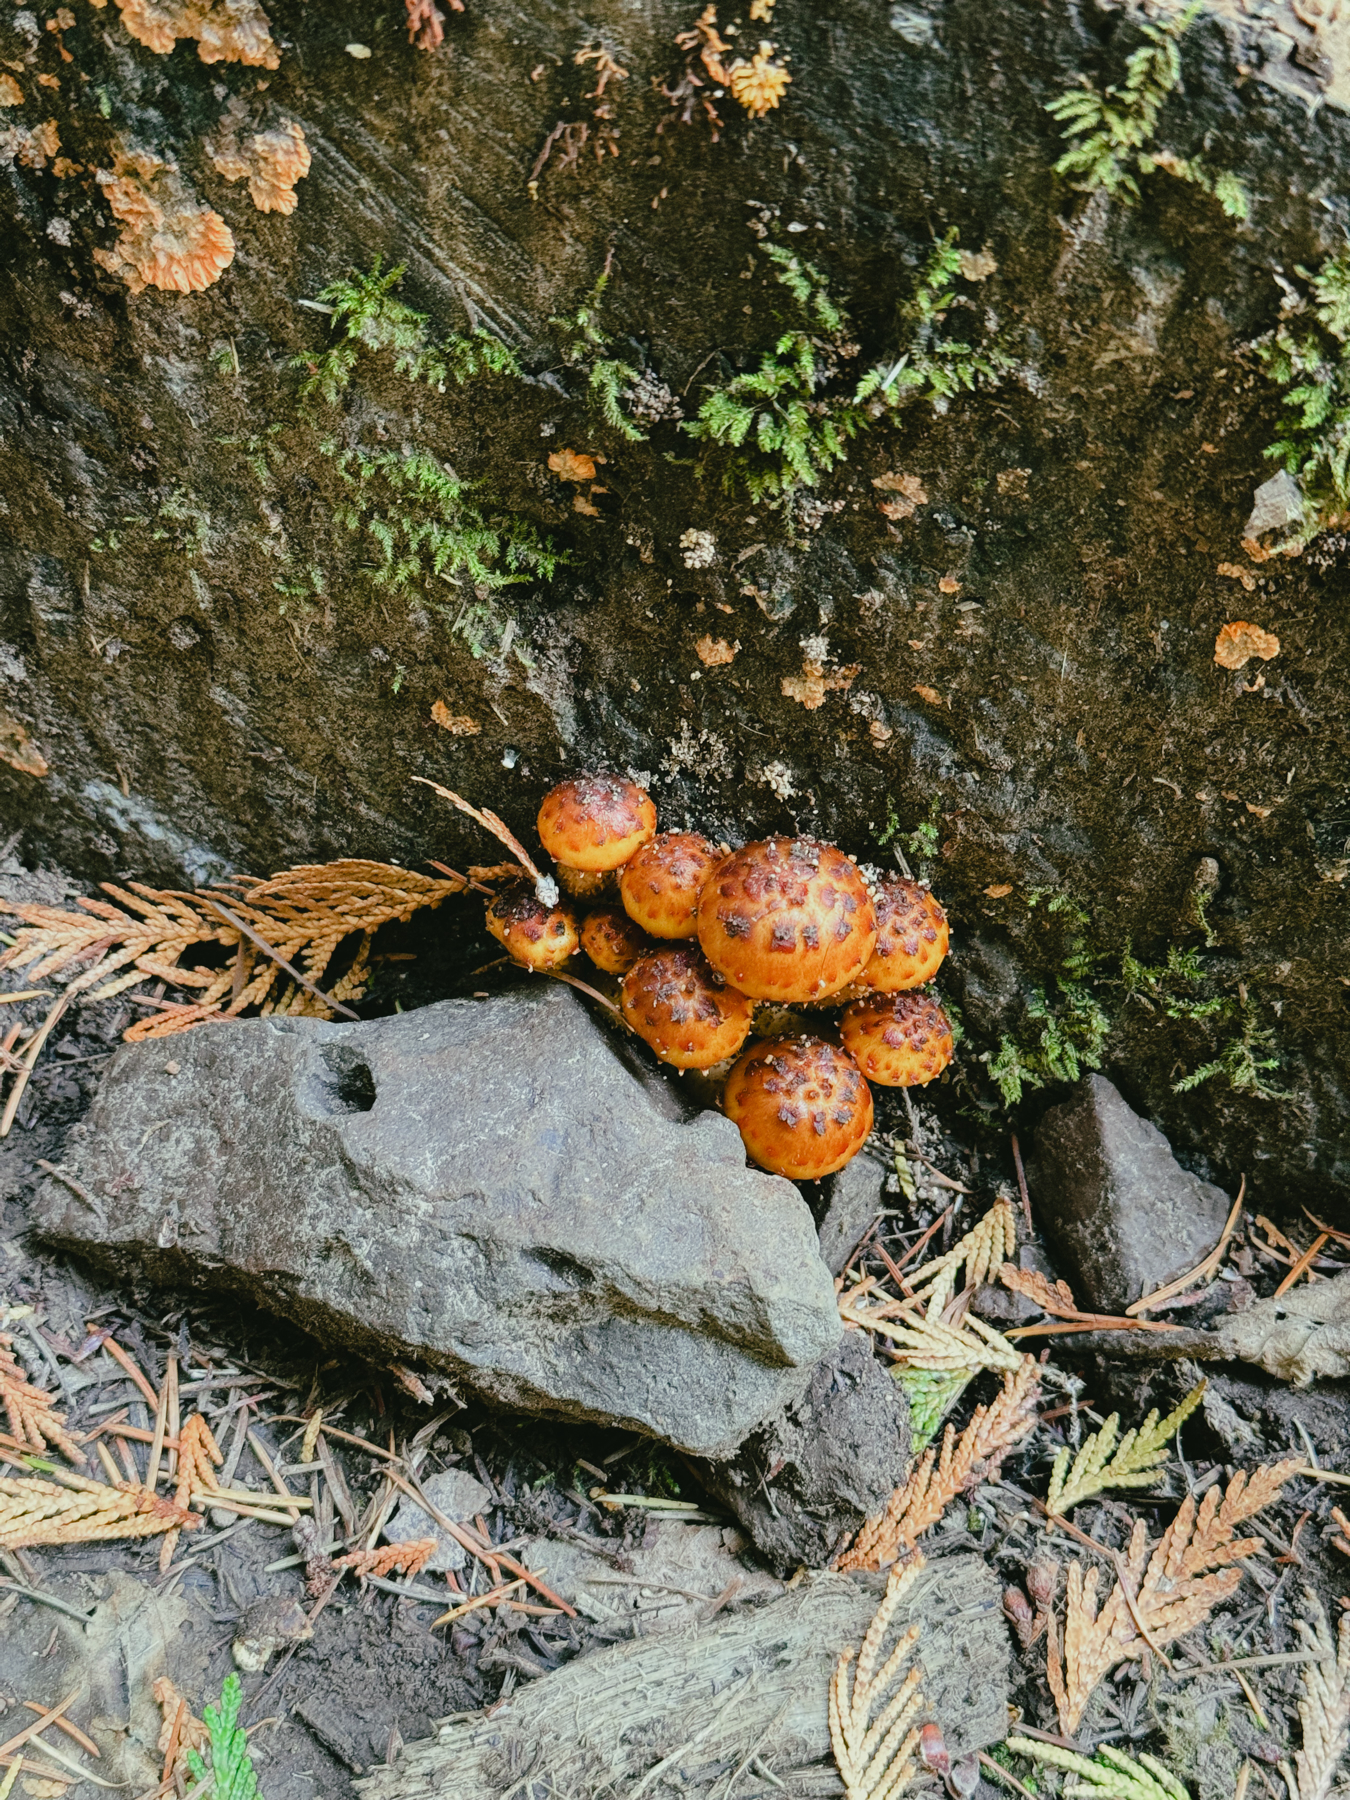 Dark orange mushrooms with even darker spots on them, growing out of the face of a fallen tree trunk.